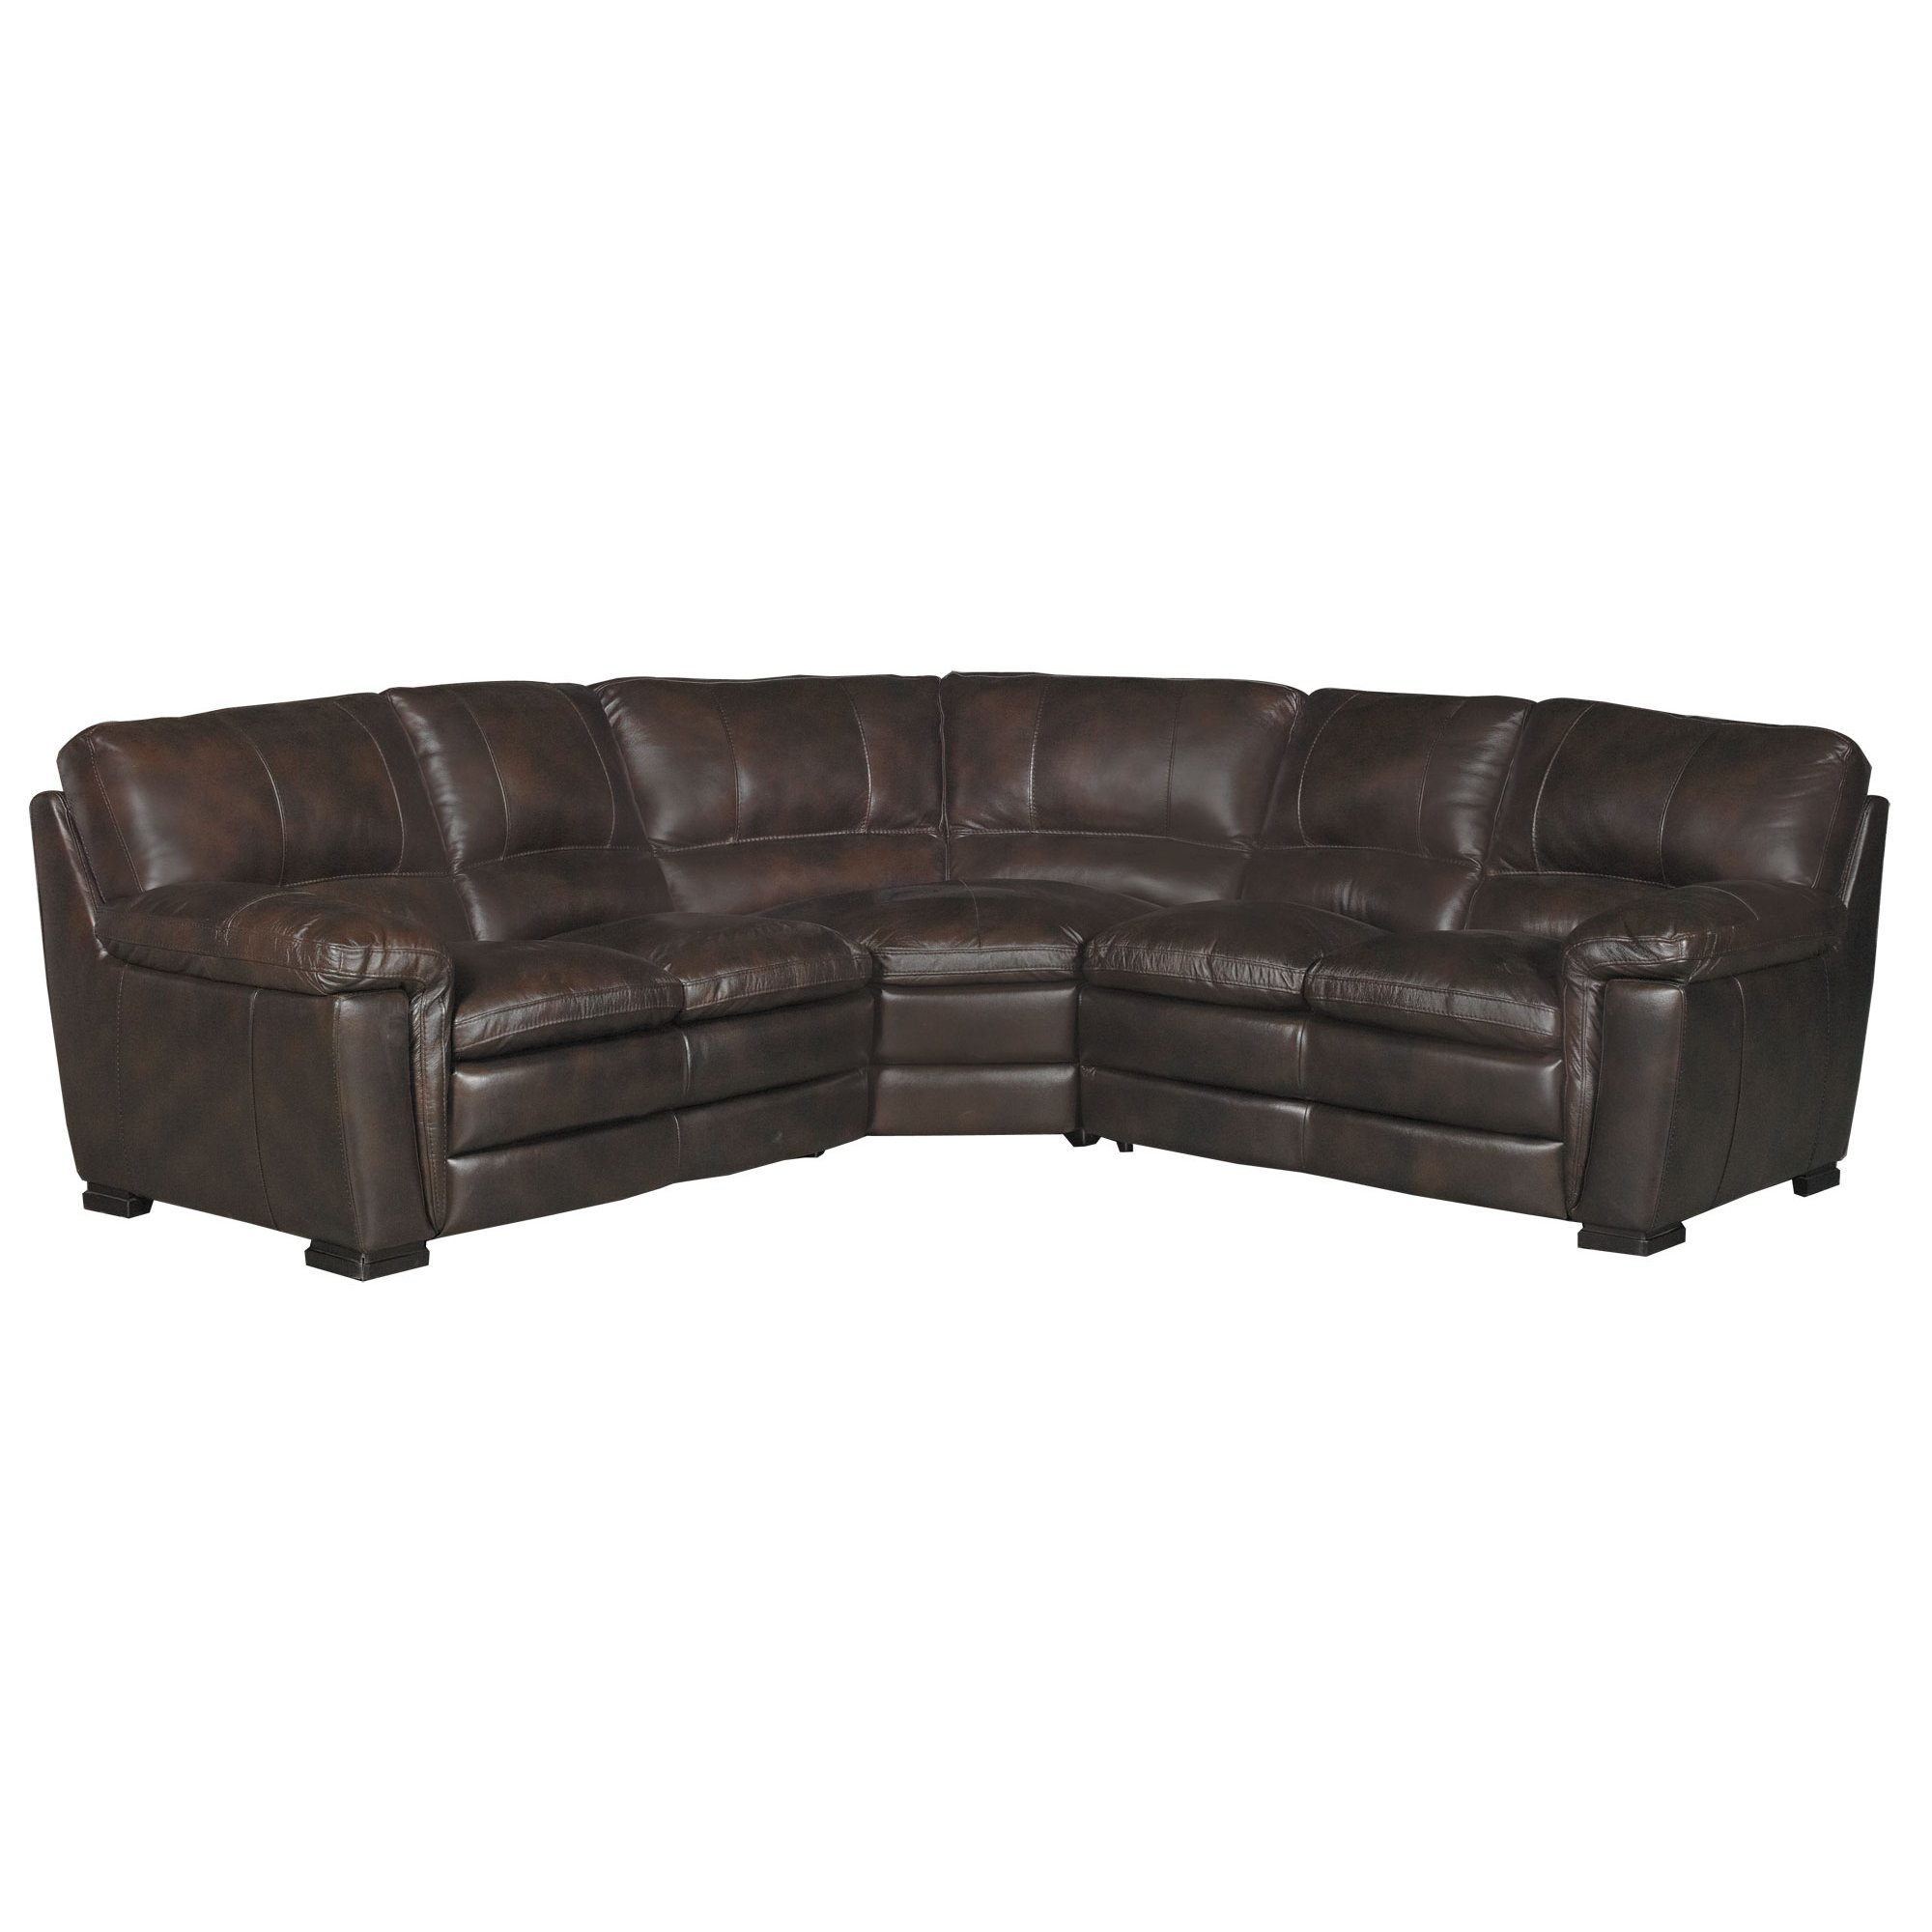 Contemporary 3 Piece Brown Leather Sectional Sofa - Tanner | RC Willey  Furniture Store